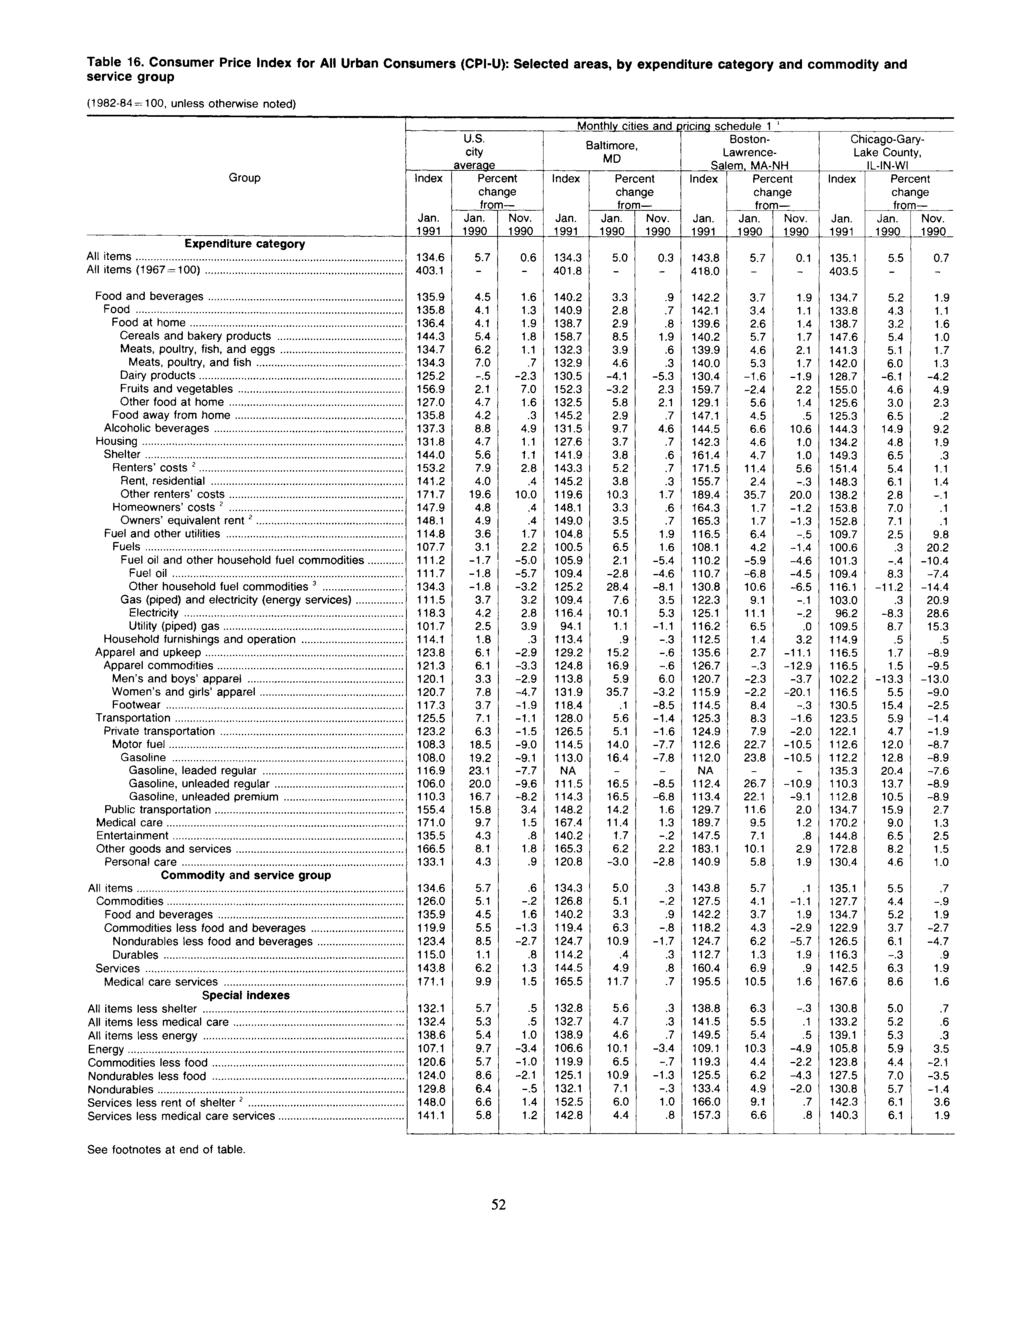 Table 16. Consumer Price for All Urban Consumers (CPI-U): Selected areas, by expenditure category and commodity and service group U.S. city averaae Nov.